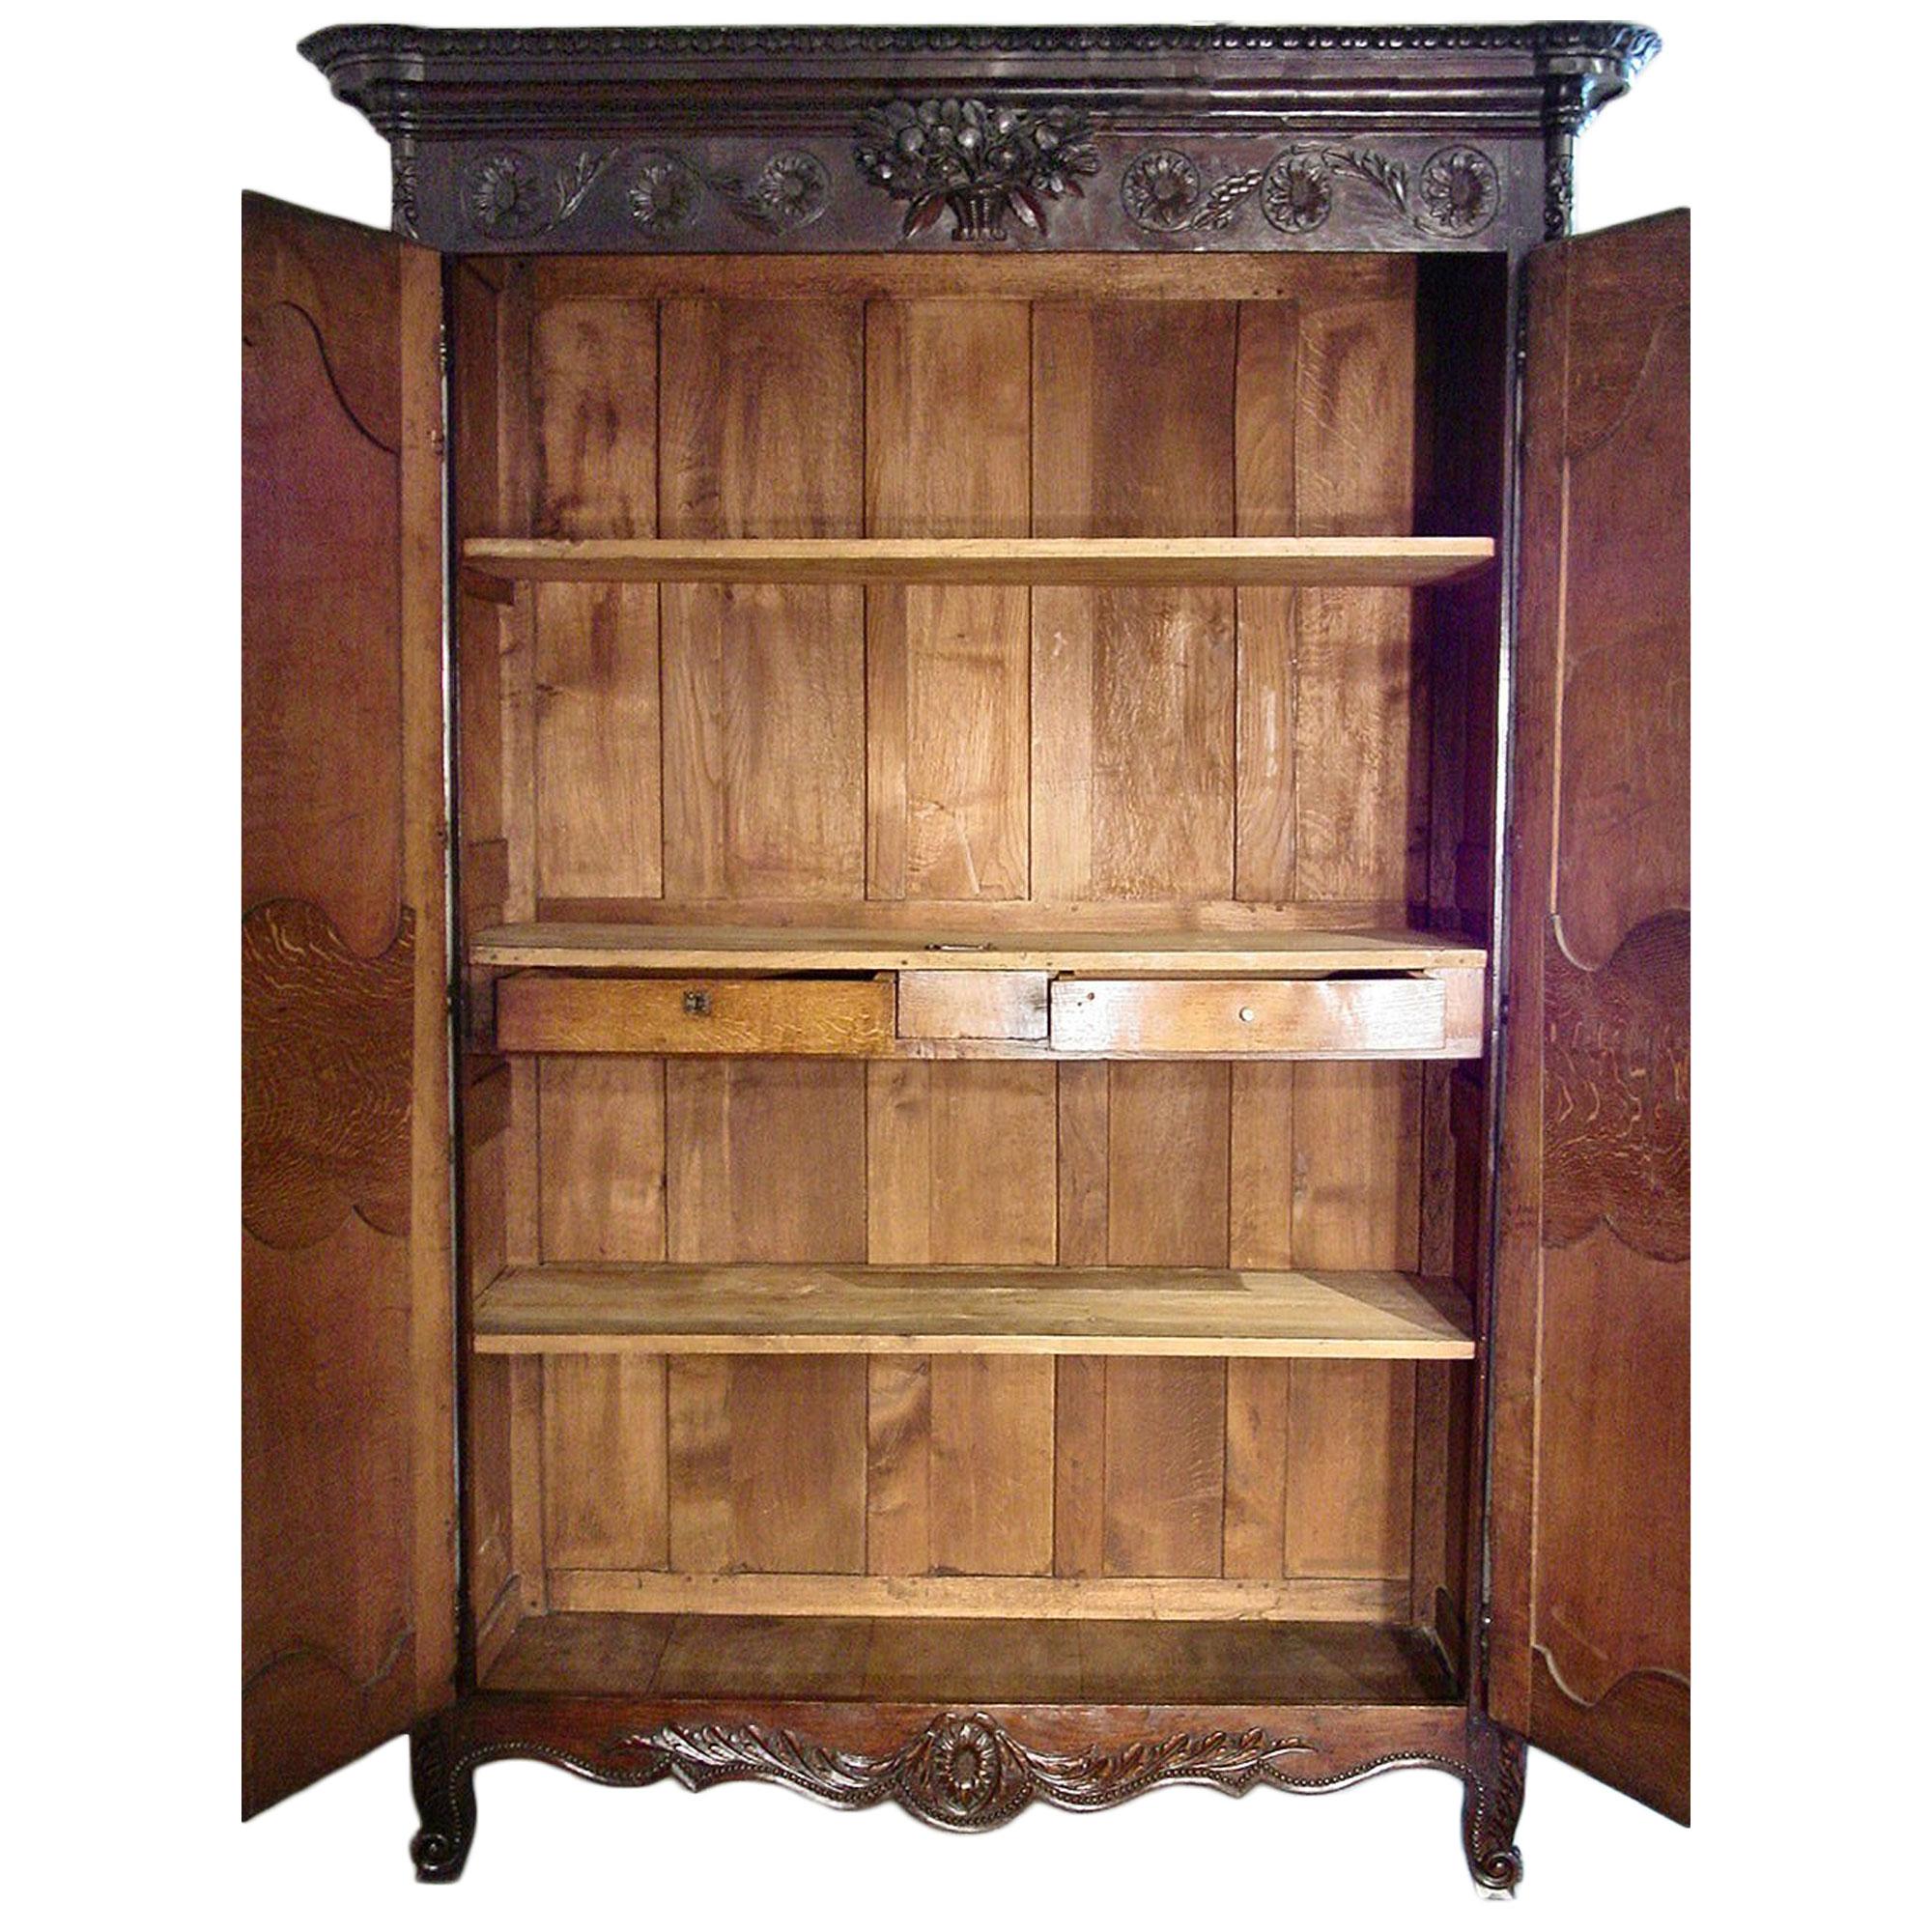 An exceptional and extremely high quality, mid 18th century circa. 1750, French Louis XVI Period Normandy marriage armoire in dark Oak. The armoire with all original hardware including hinges going from the top to the bottom of the doors, has two